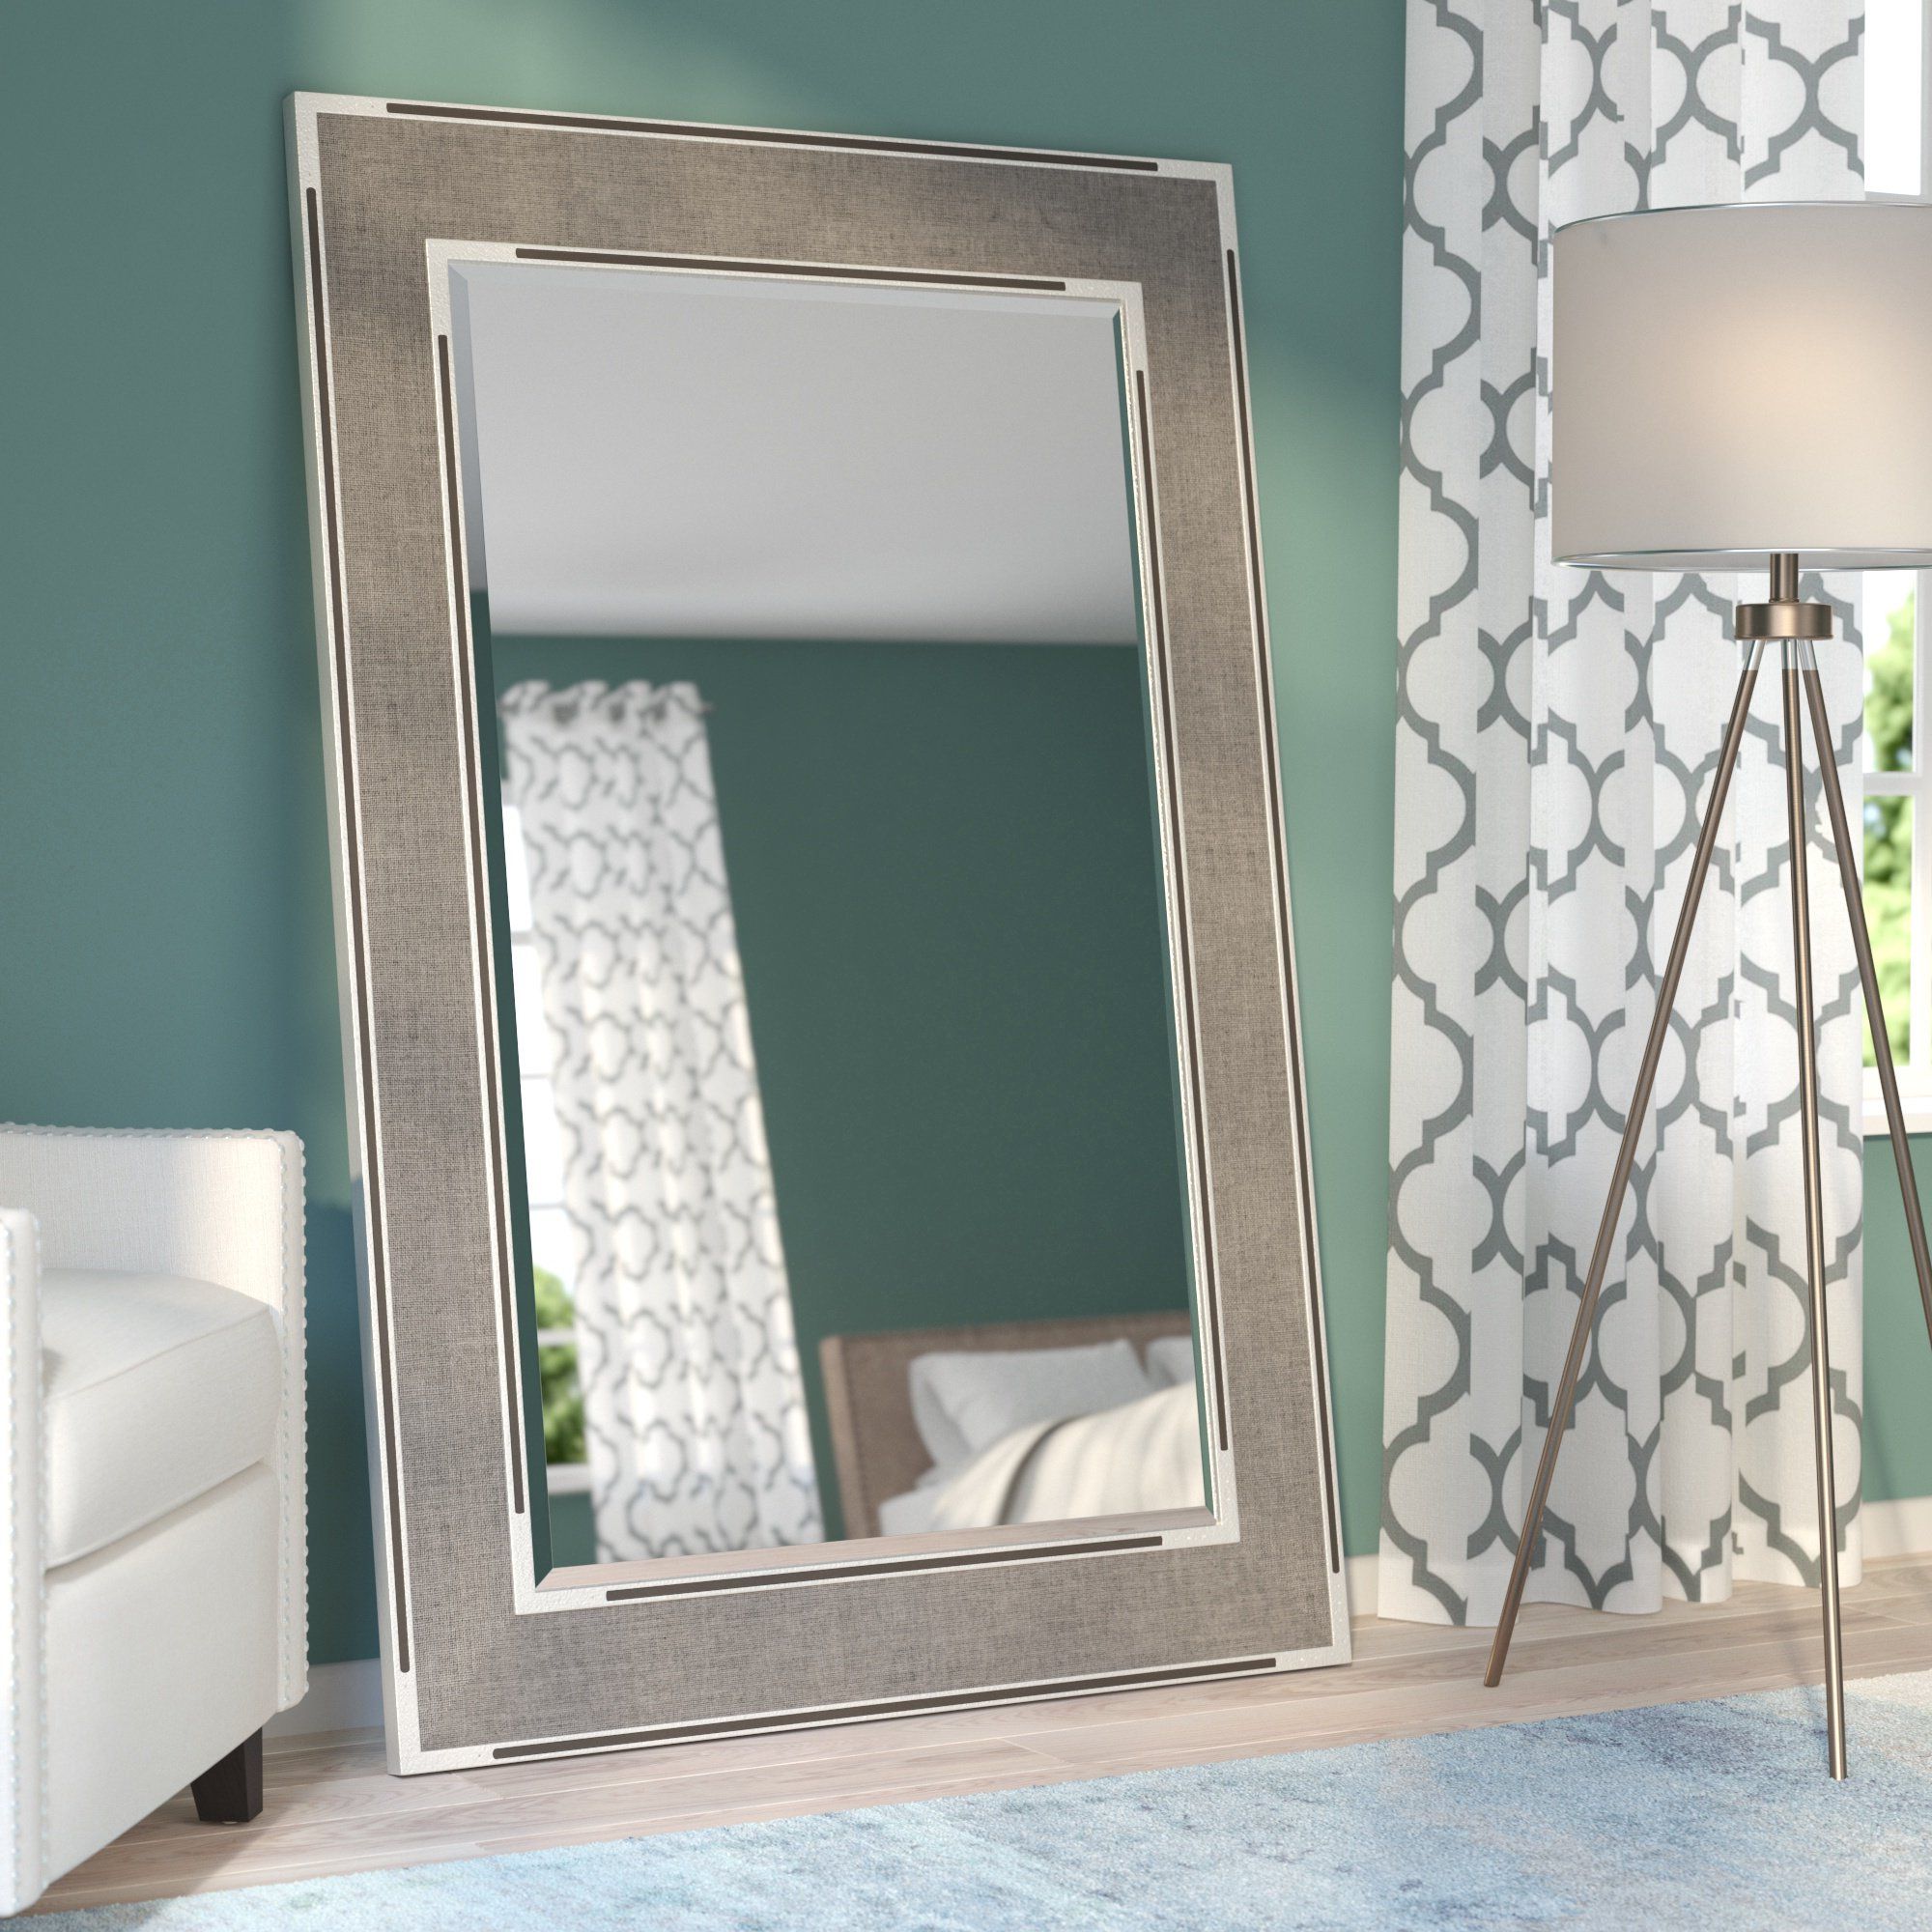 Best And Newest Brodbeck Oversized Wall Mirror Within Wide Wall Mirrors (View 17 of 20)